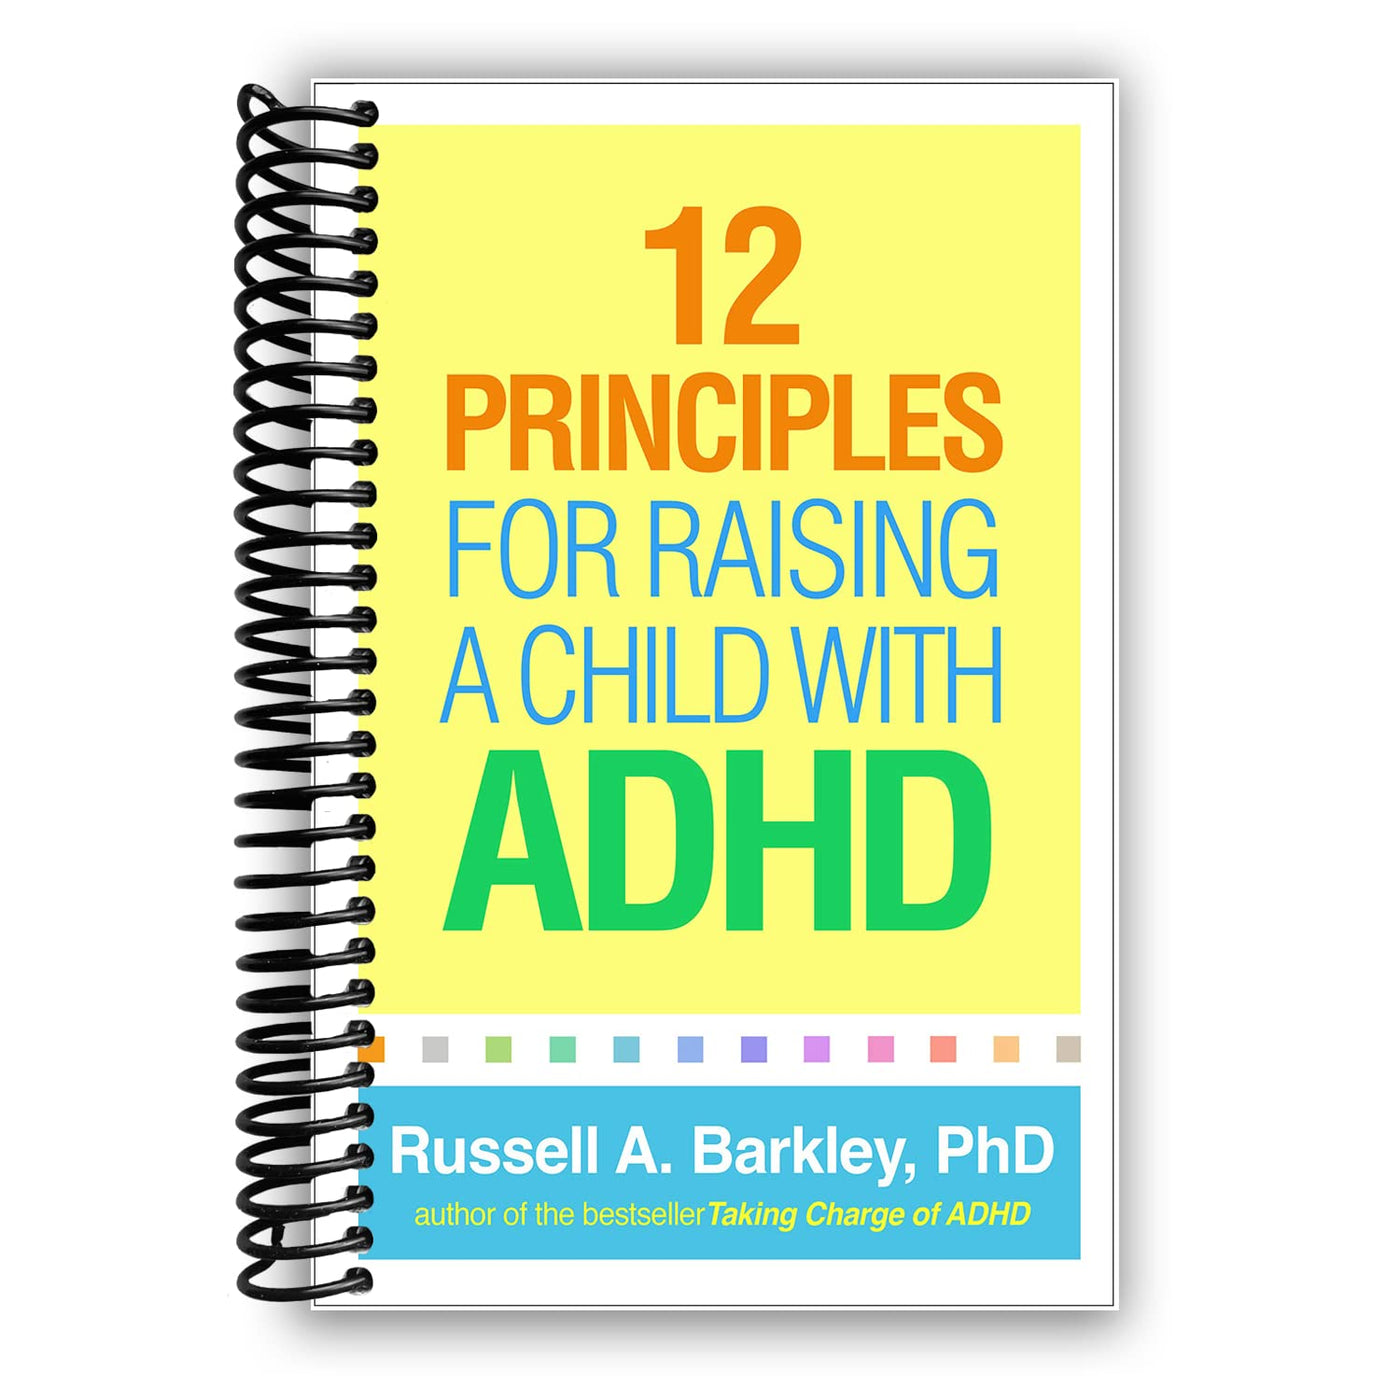 12 Principles for Raising a Child with ADHD (Spiral Bound)